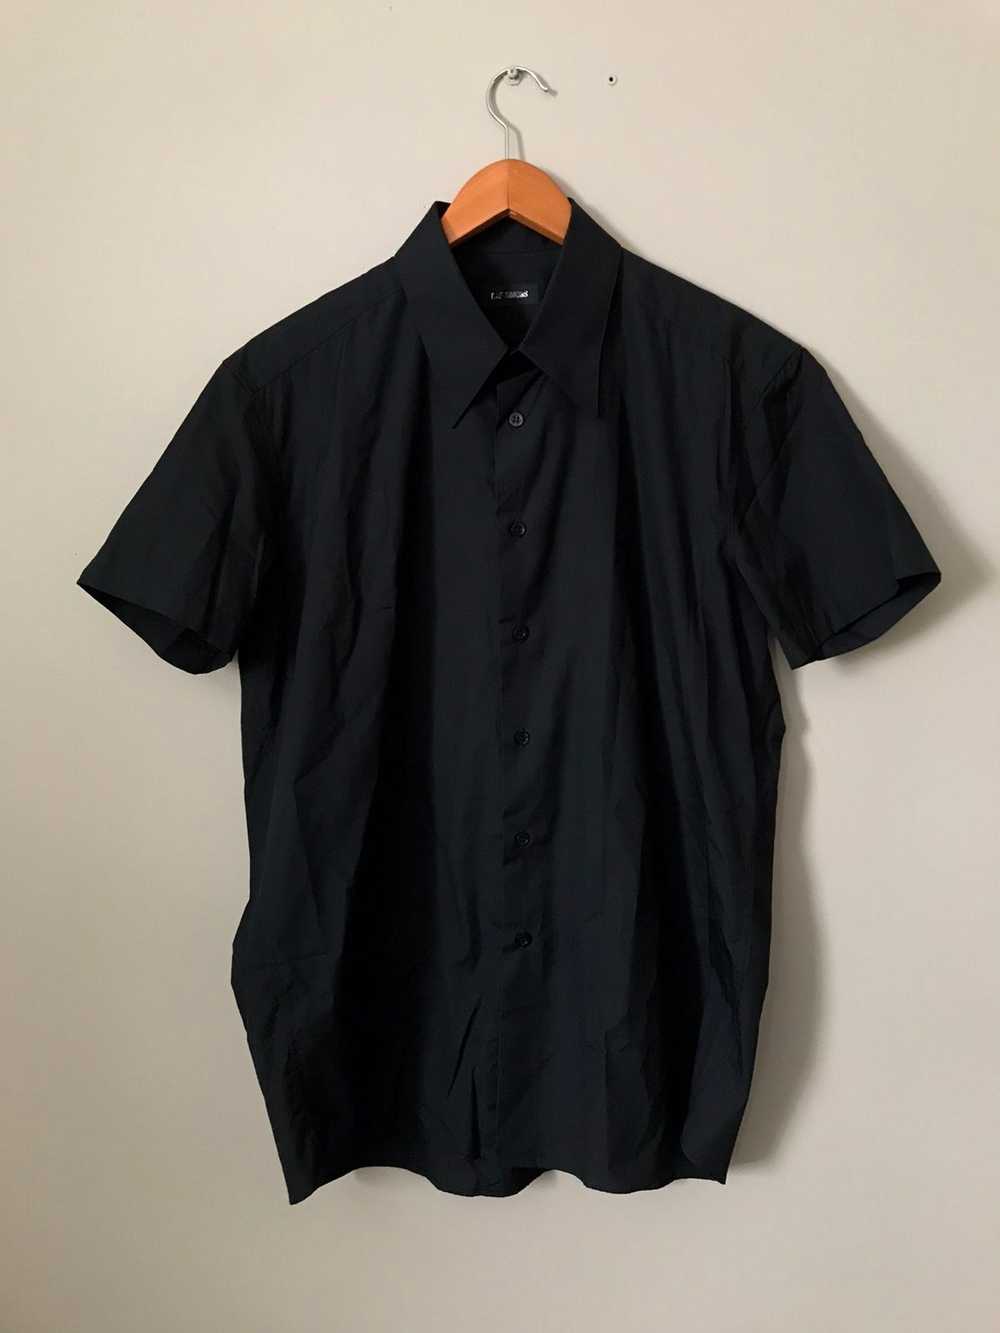 Raf Simons SS19 “Clubbers” Oversized Button Up - image 2